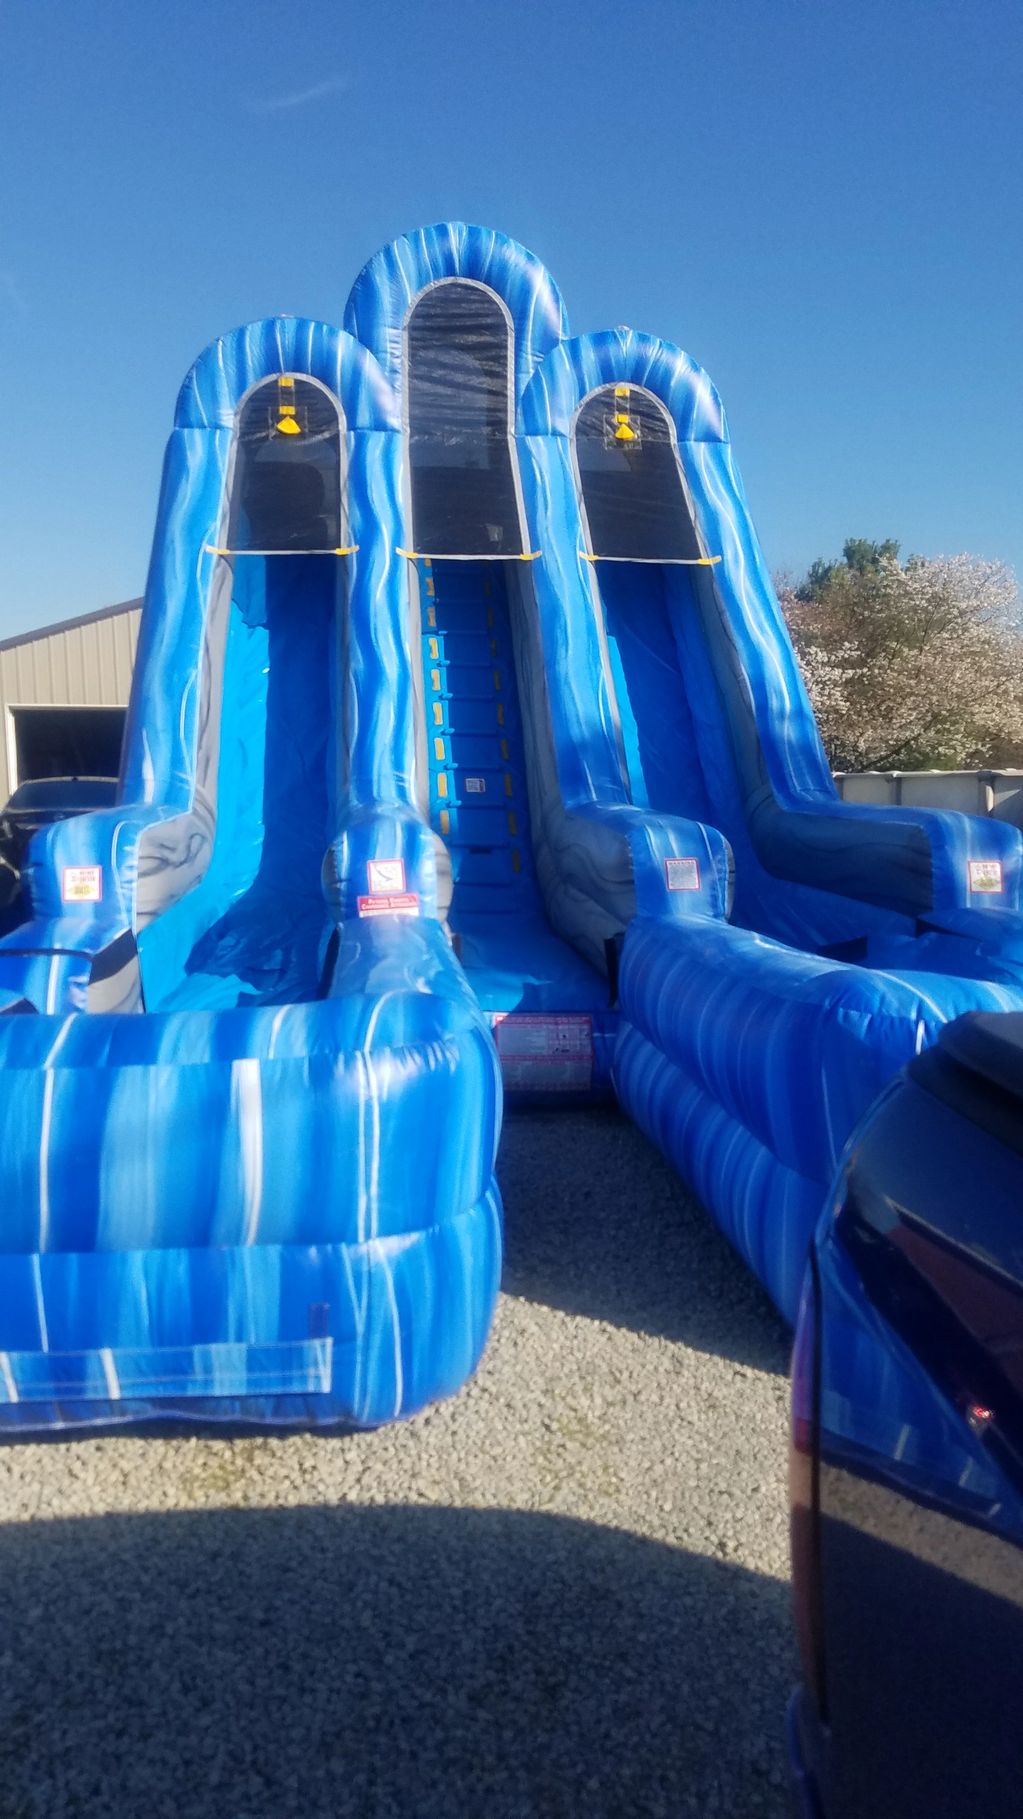 DOUBLE BLUE MARBLE
20FT Tall 40ft long 20ft wide
Dual lane slide with pools
375.00